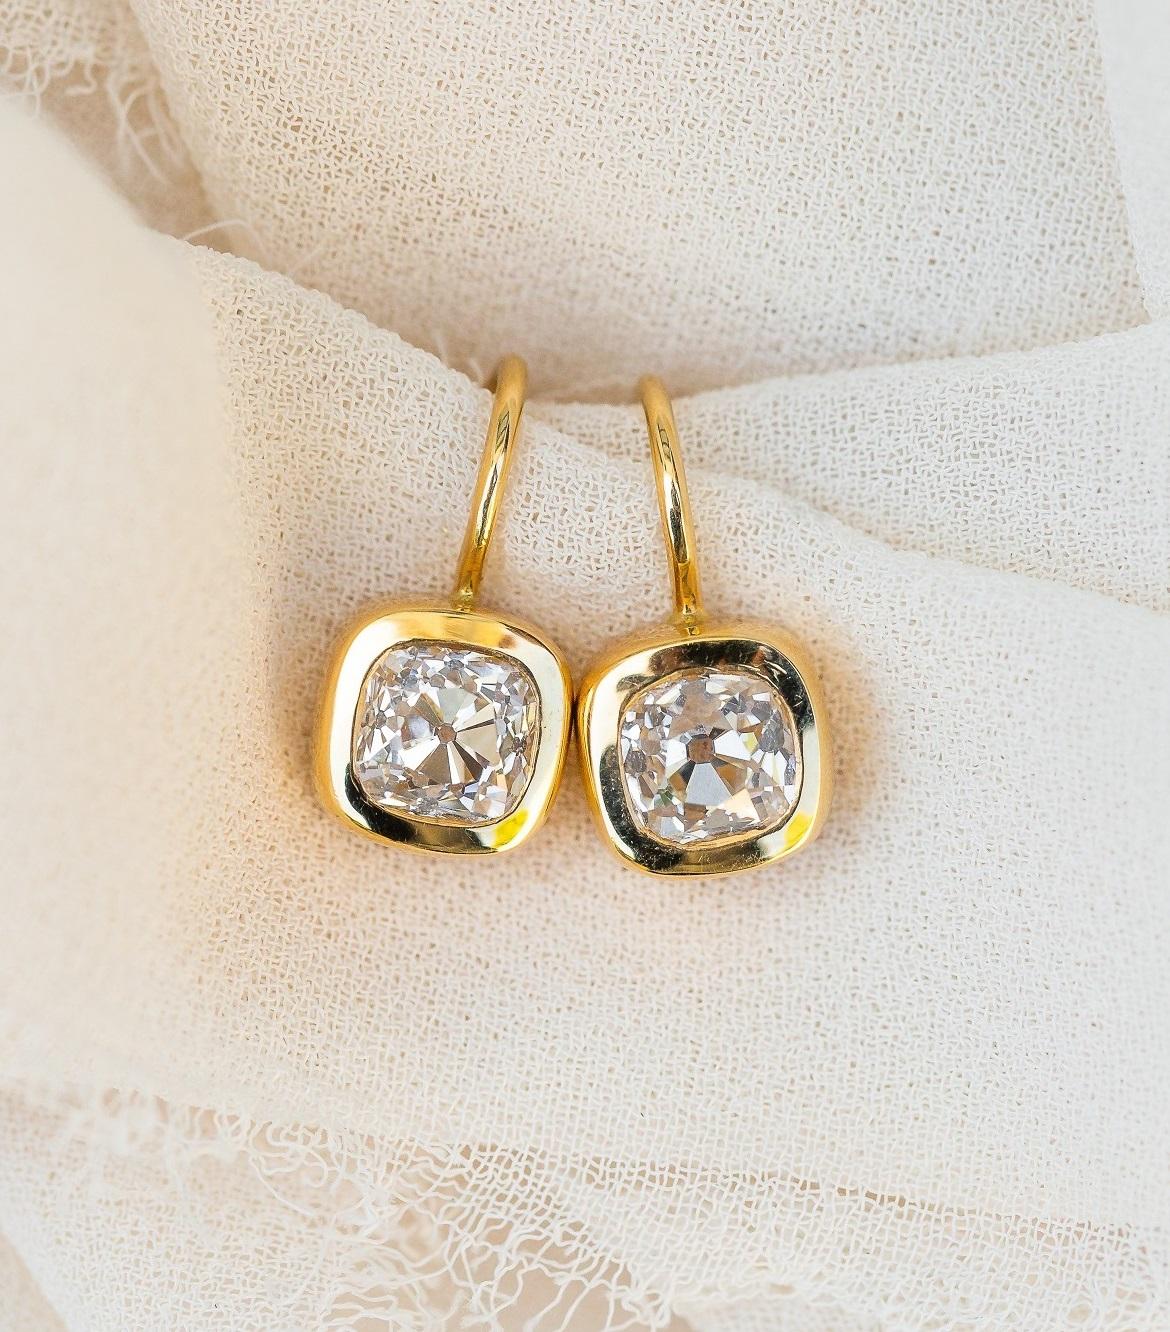 Contemporary Handcrafted Joyce Cushion Cut Diamond Drop Earrings by Single Stone For Sale